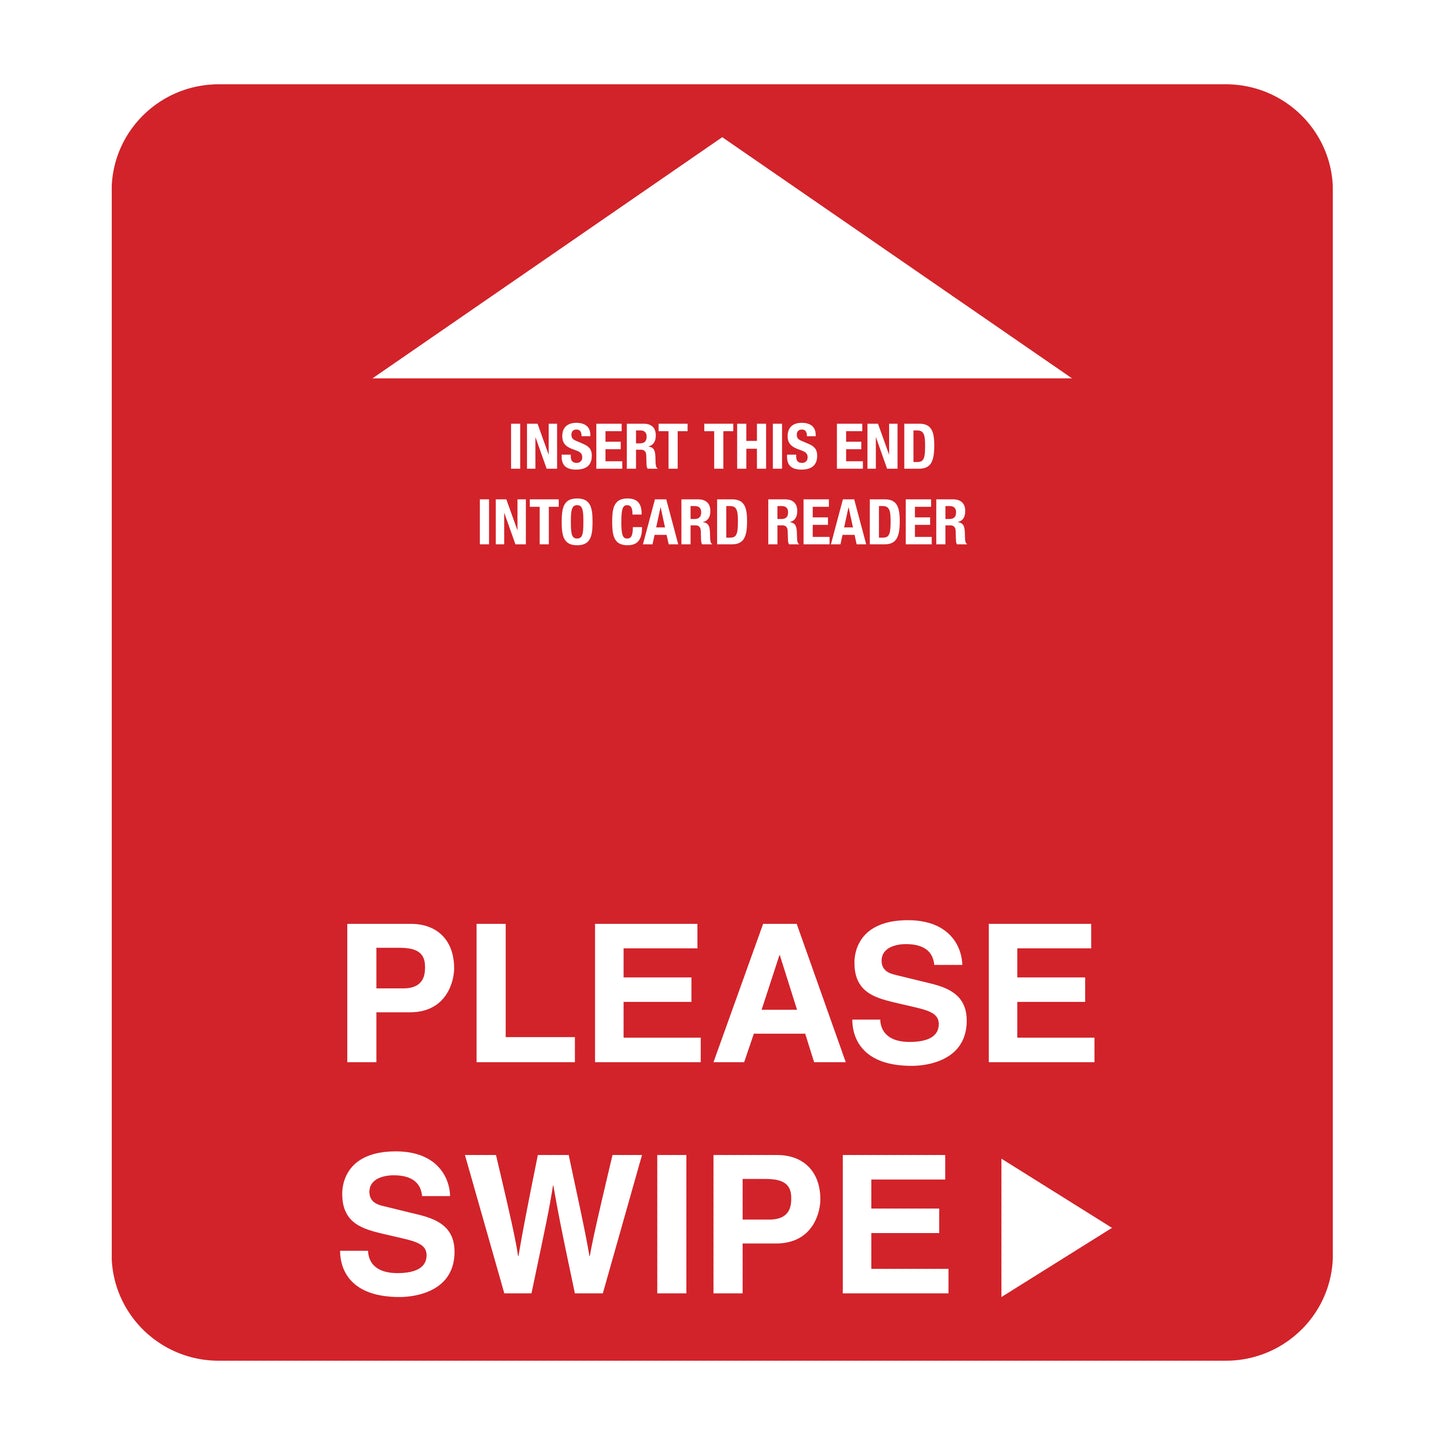 "Please Swipe" Card Reader Insert, square size in Red.